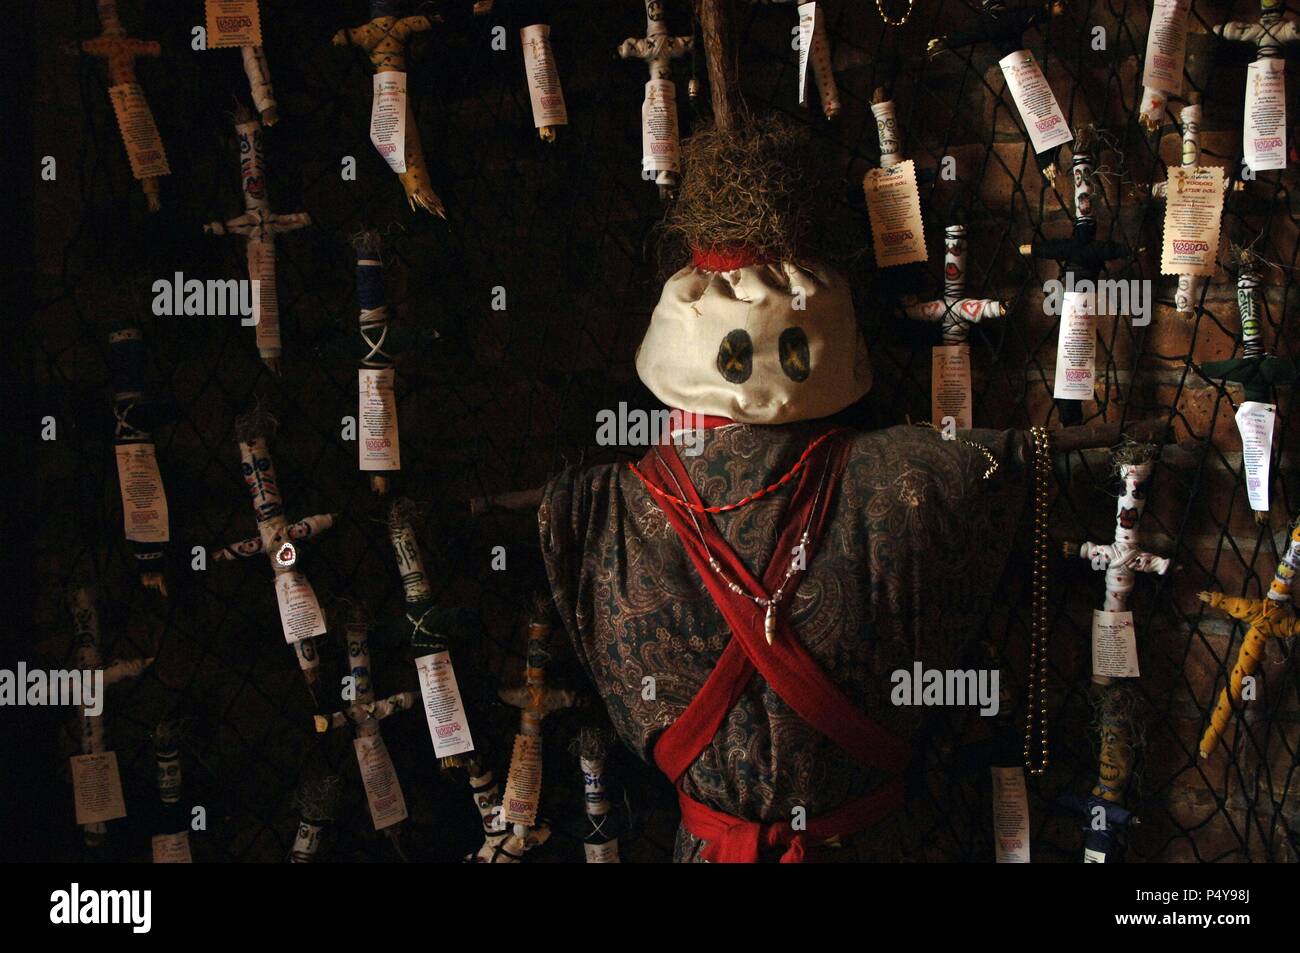 The New Orleans Historic Voodoo Museum. Voodoo objects. New Orleans. USA. Stock Photo